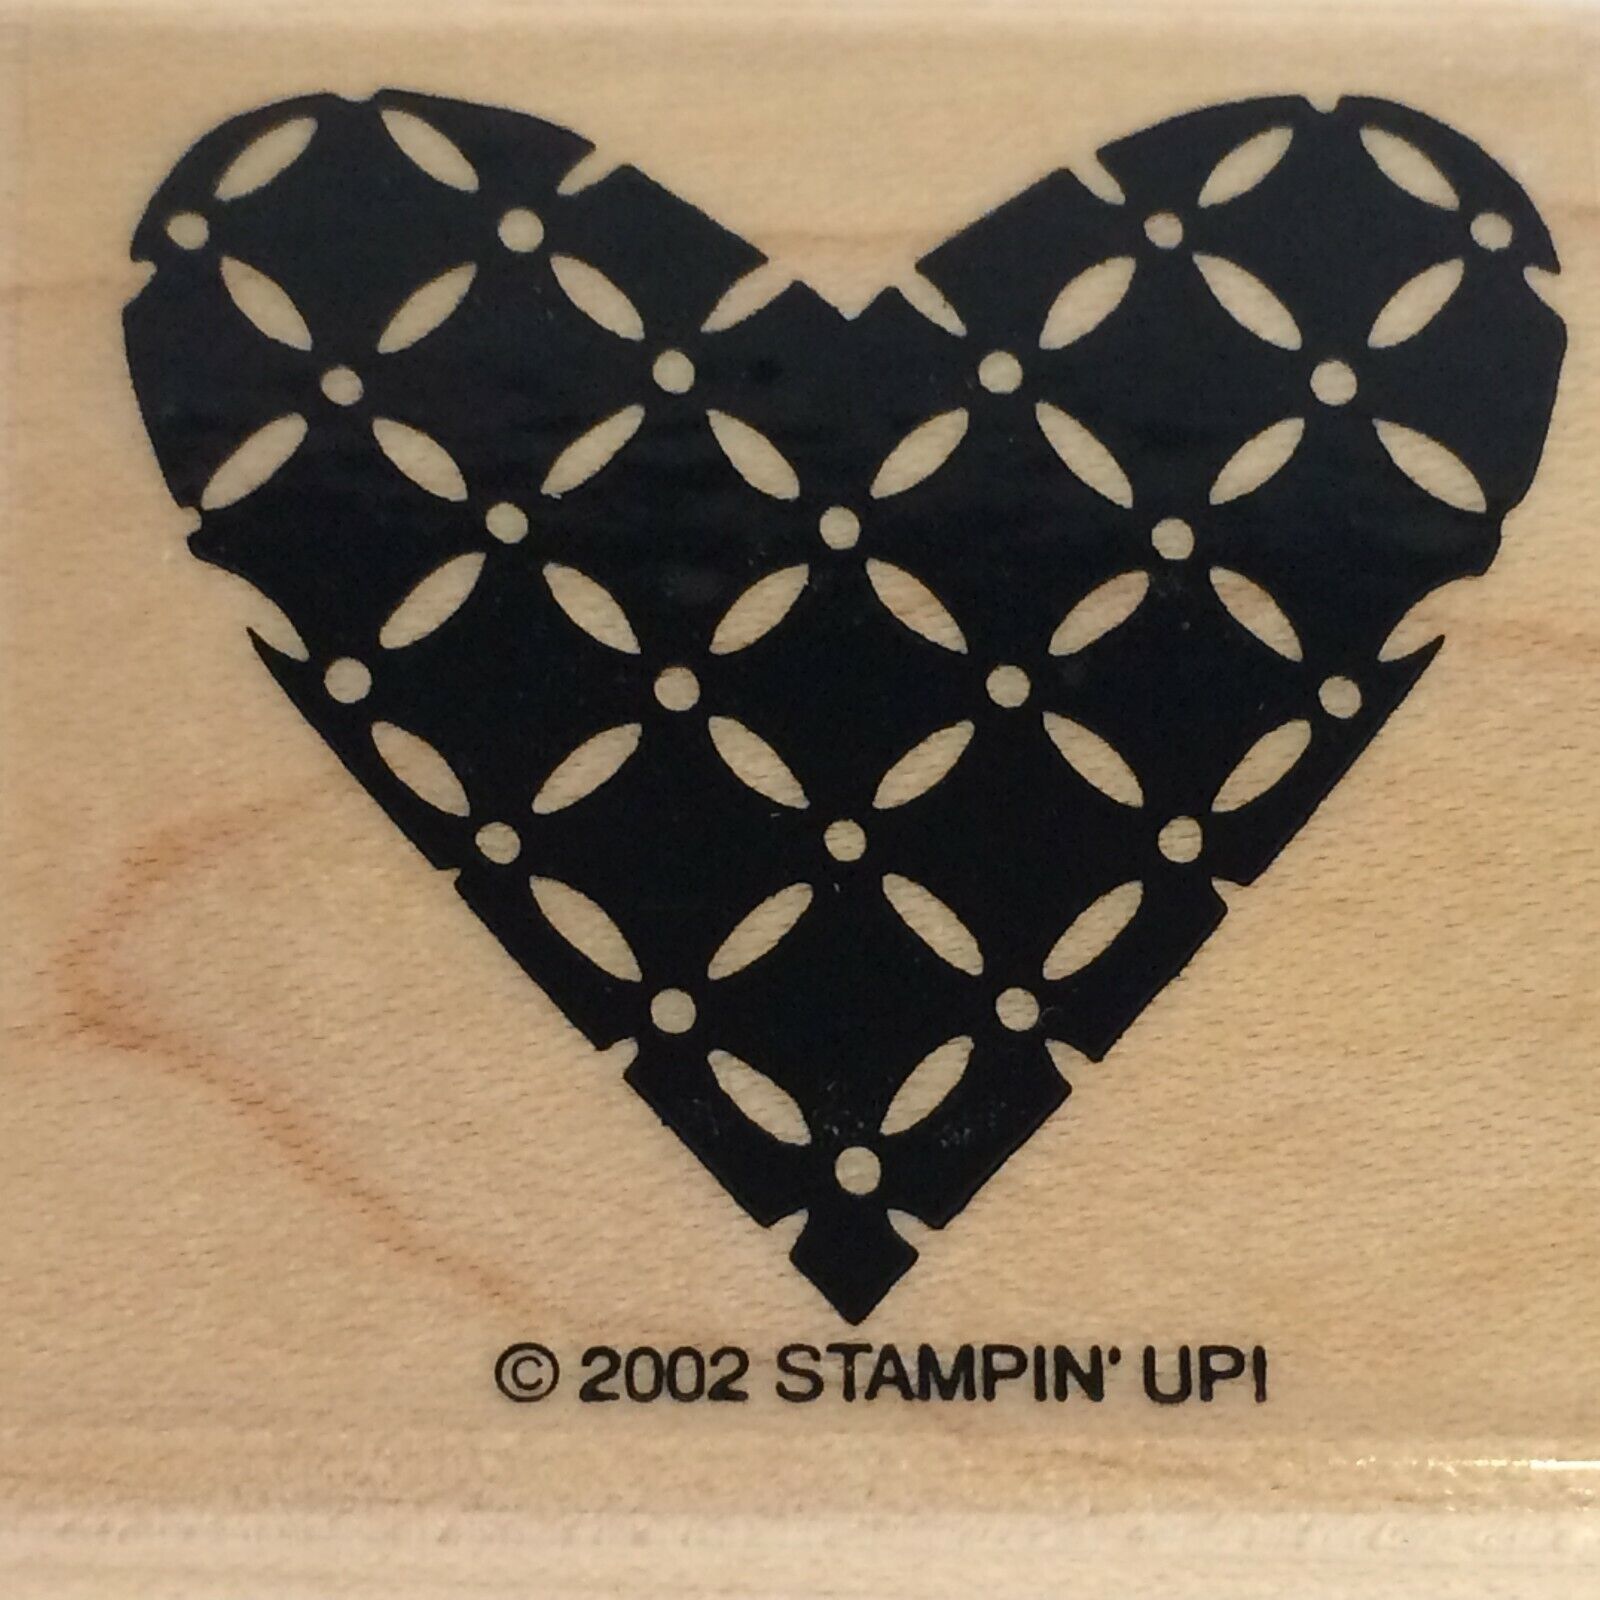 Primary image for Stampin' Up Heart Mounted Rubber Stamp Card Making Craft Love Loose 2002 